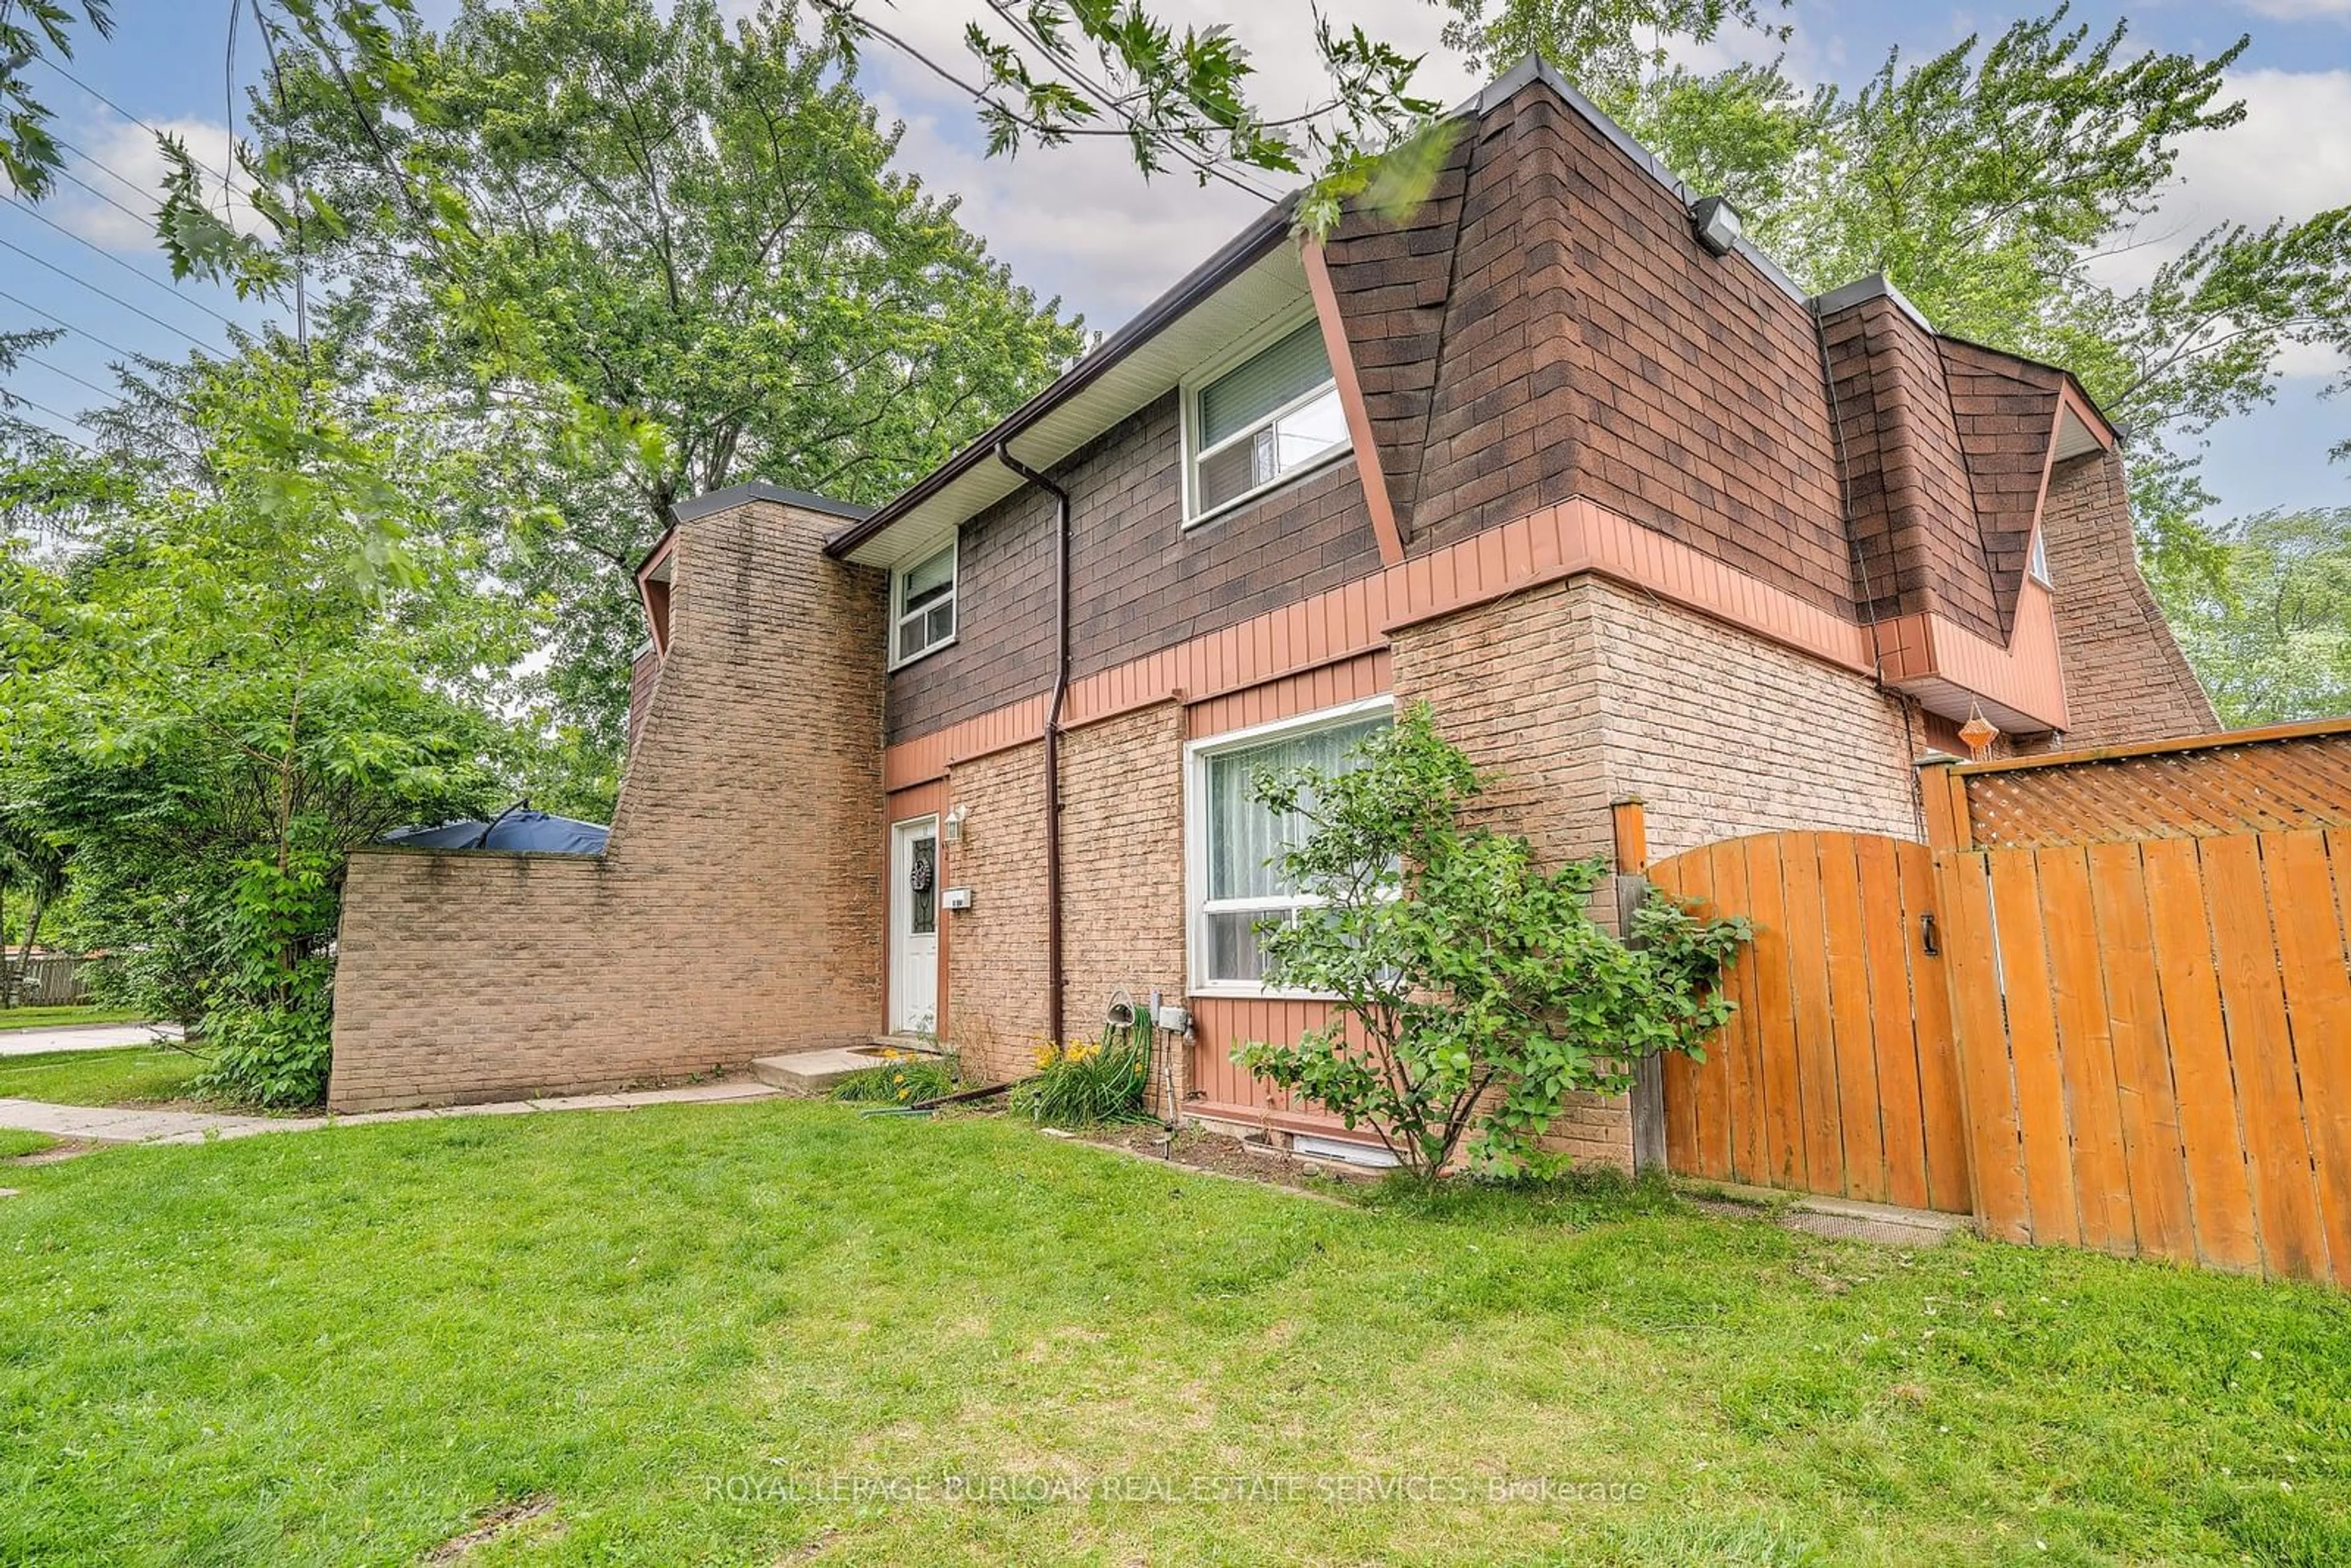 Home with brick exterior material for 665 Francis Rd #2, Burlington Ontario L7T 3X6